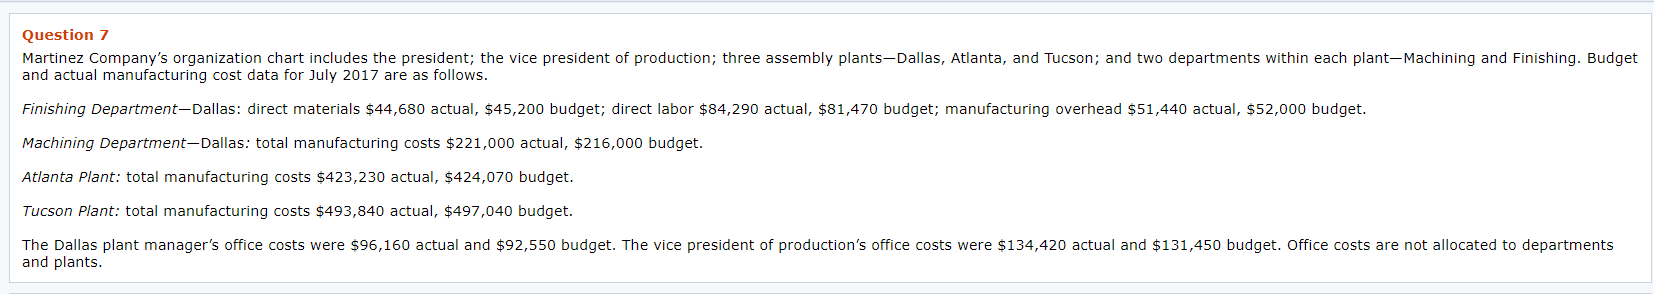 Martinez Company's organization chart includes the president; the vice president of production; three assembly plants-Dallas, Atlanta, and Tucson; and two departments within each plant-Machining and Finishing. Budget
and actual manufacturing cost data for July 2017 are as follows.
Finishing Department-Dallas: direct materials $44,680 actual, $45,200 budget; direct labor $84,290 actual, $81,470 budget; manufacturing overhead $51,440 actual, $52,000 budget.
Machining Department-Dallas: total manufacturing costs $221,000 actual, $216,000 budget.
Atlanta Plant: total manufacturing costs $423,230 actual, $424,070 budget.
Tucson Plant: total manufacturing costs $493,840 actual, $497,040 budget.
The Dallas plant manager's office costs were $96,160 actual and $92,550 budget. The vice president of production's office costs were $134,420 actual and $131,450 budget. Office costs are not allocated to departments
and plants.
